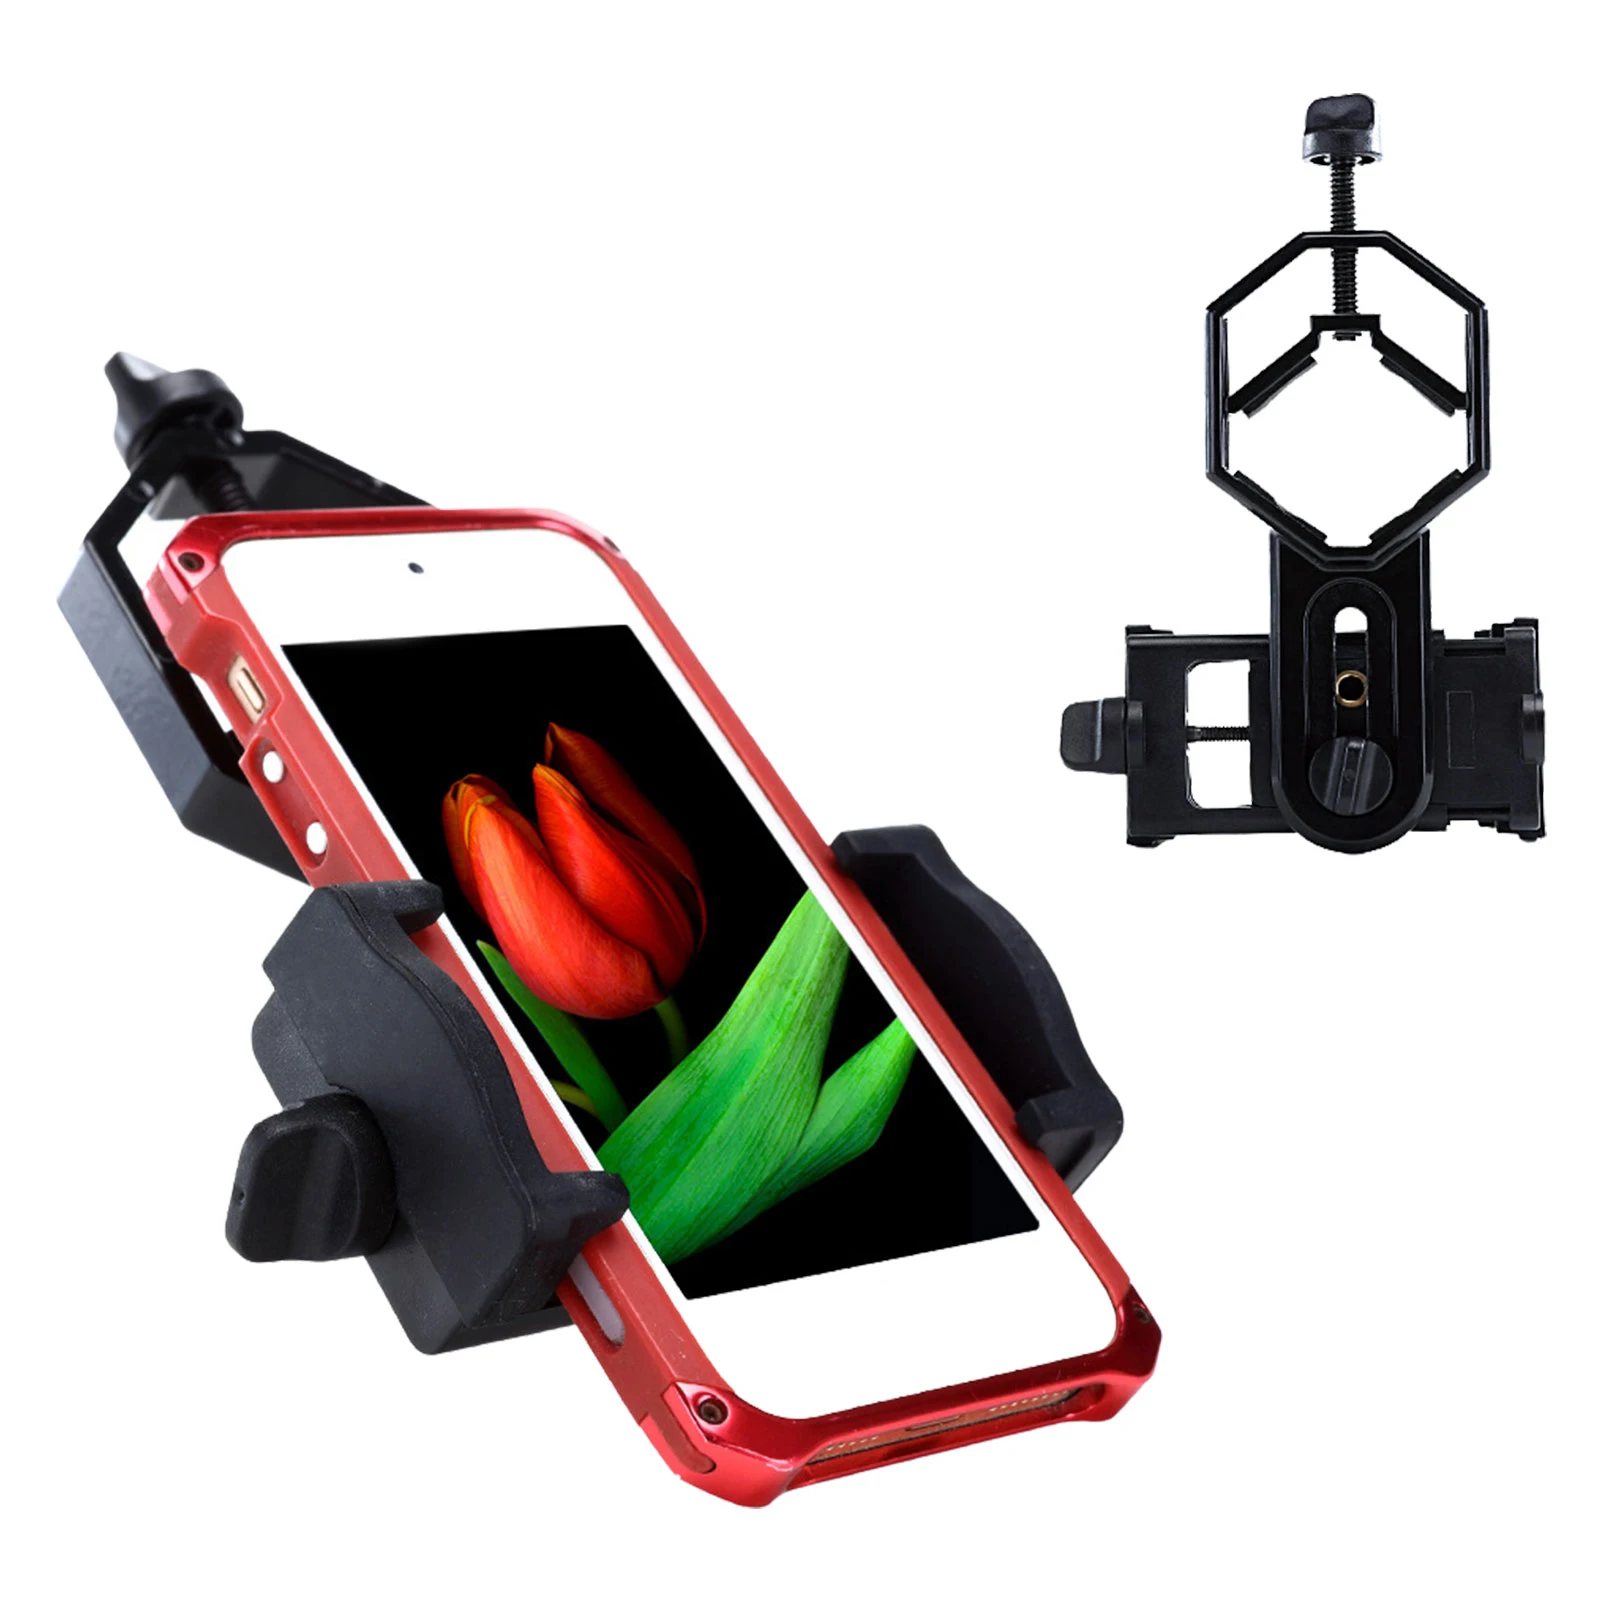 

Adjustable Metal/ABS Cellphone Adapter Mount Microscope Spotting Scope Telescope Clip Bracket Phone Stand Holder